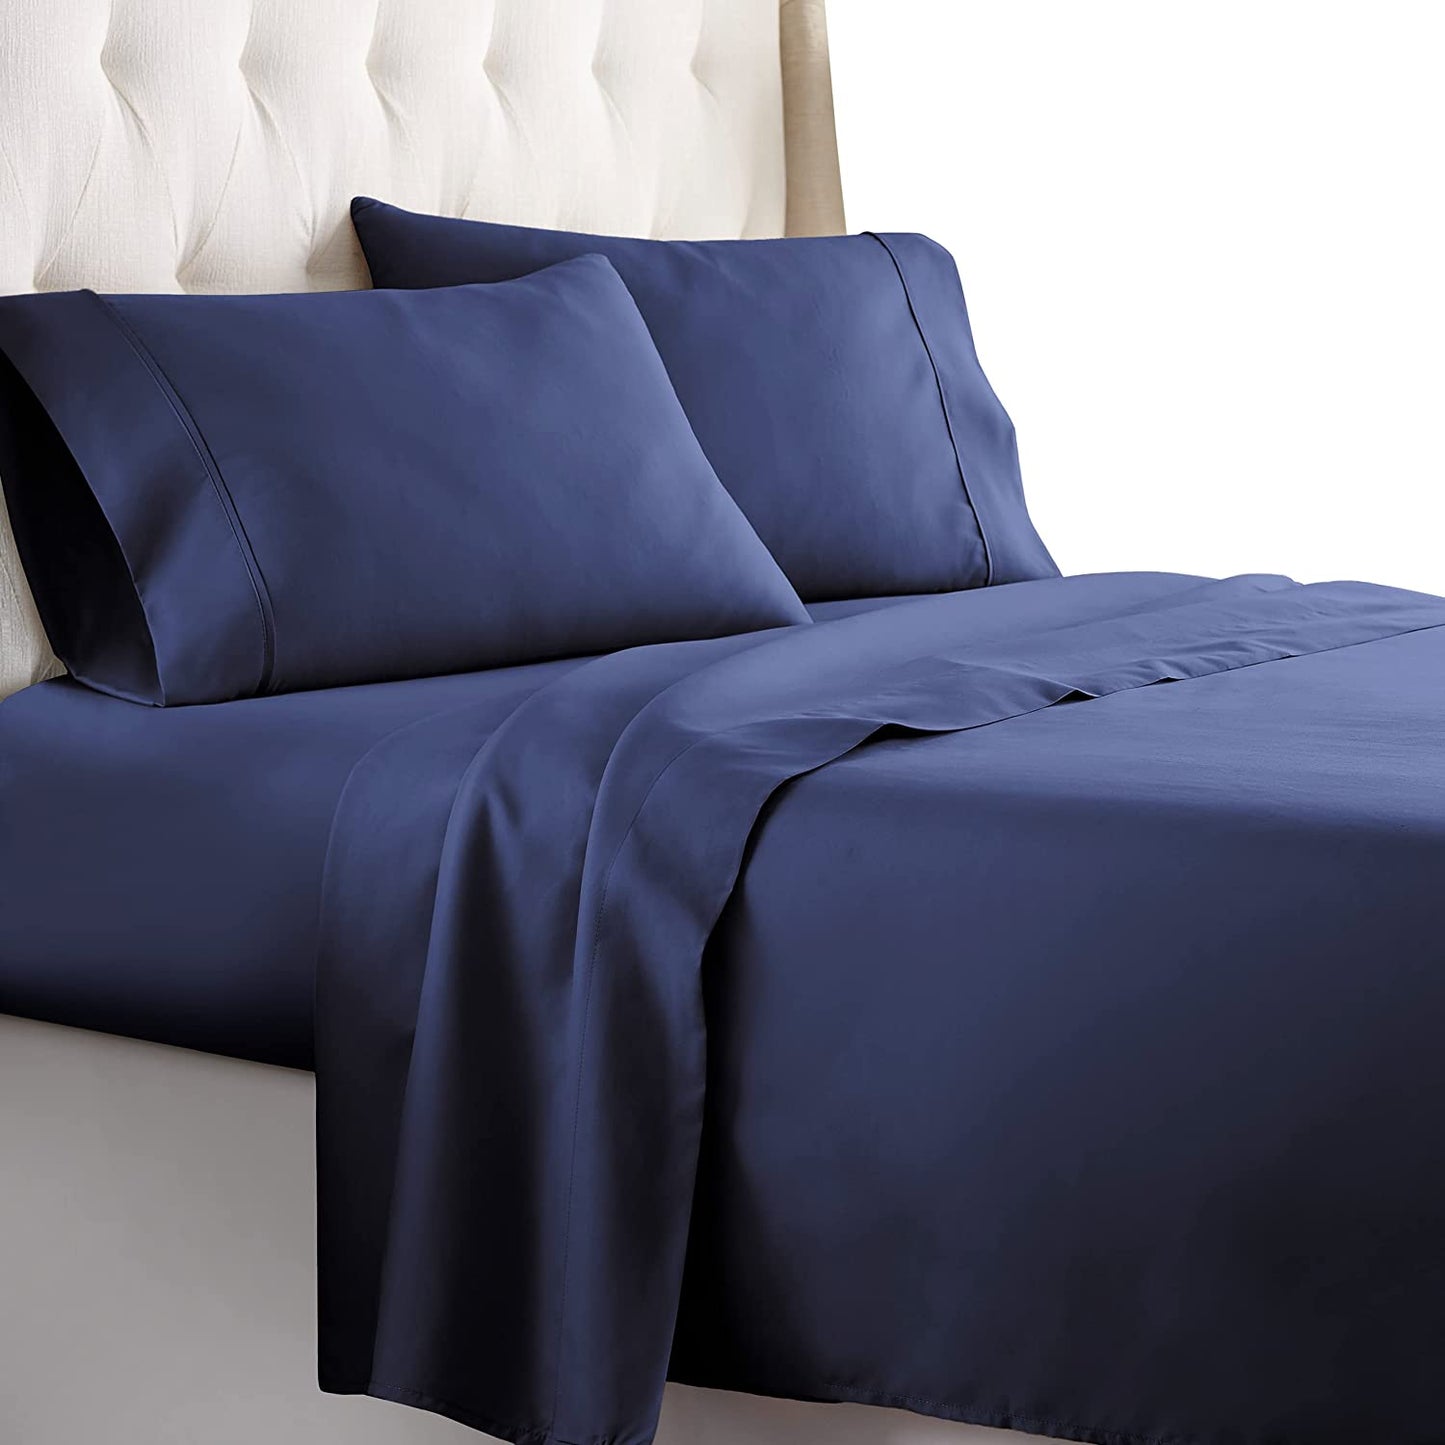 13 Inch Pocket Fitted Sheet Navy Blue 1000TC Egyptian Cotton at-EgyptianHomeLinens.com